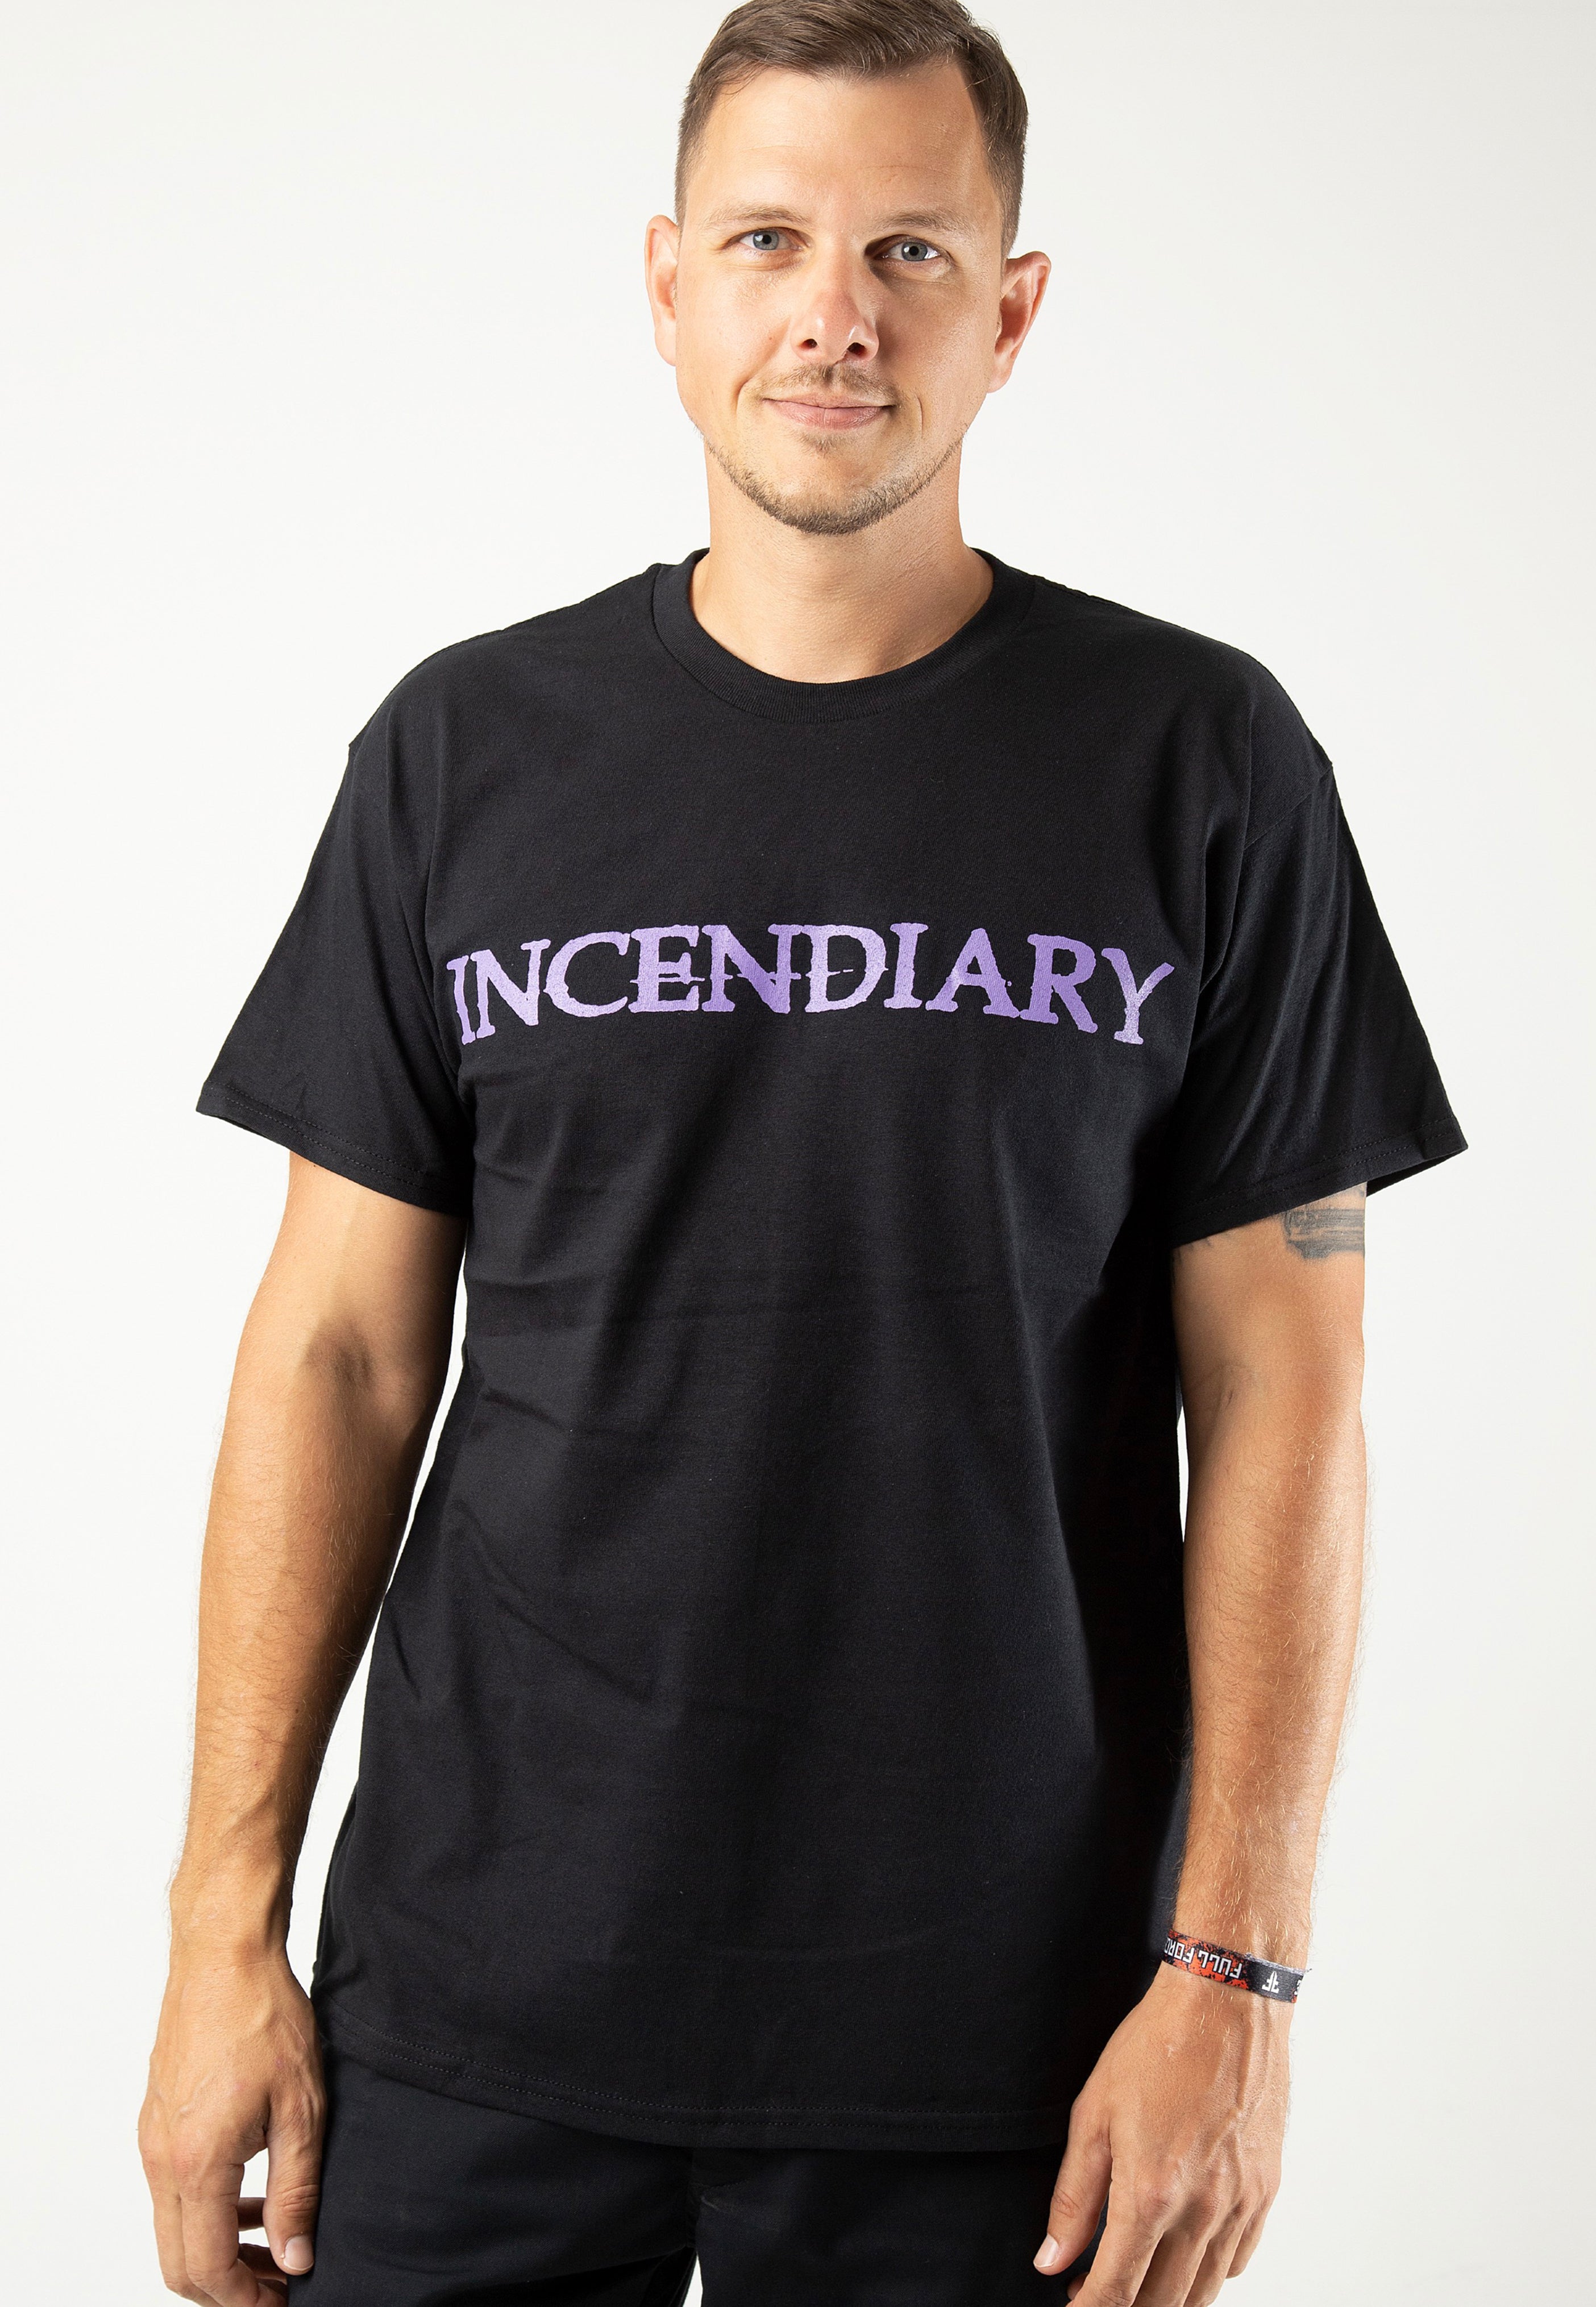 Incendiary - Product Of New York - T-Shirt | Men-Image